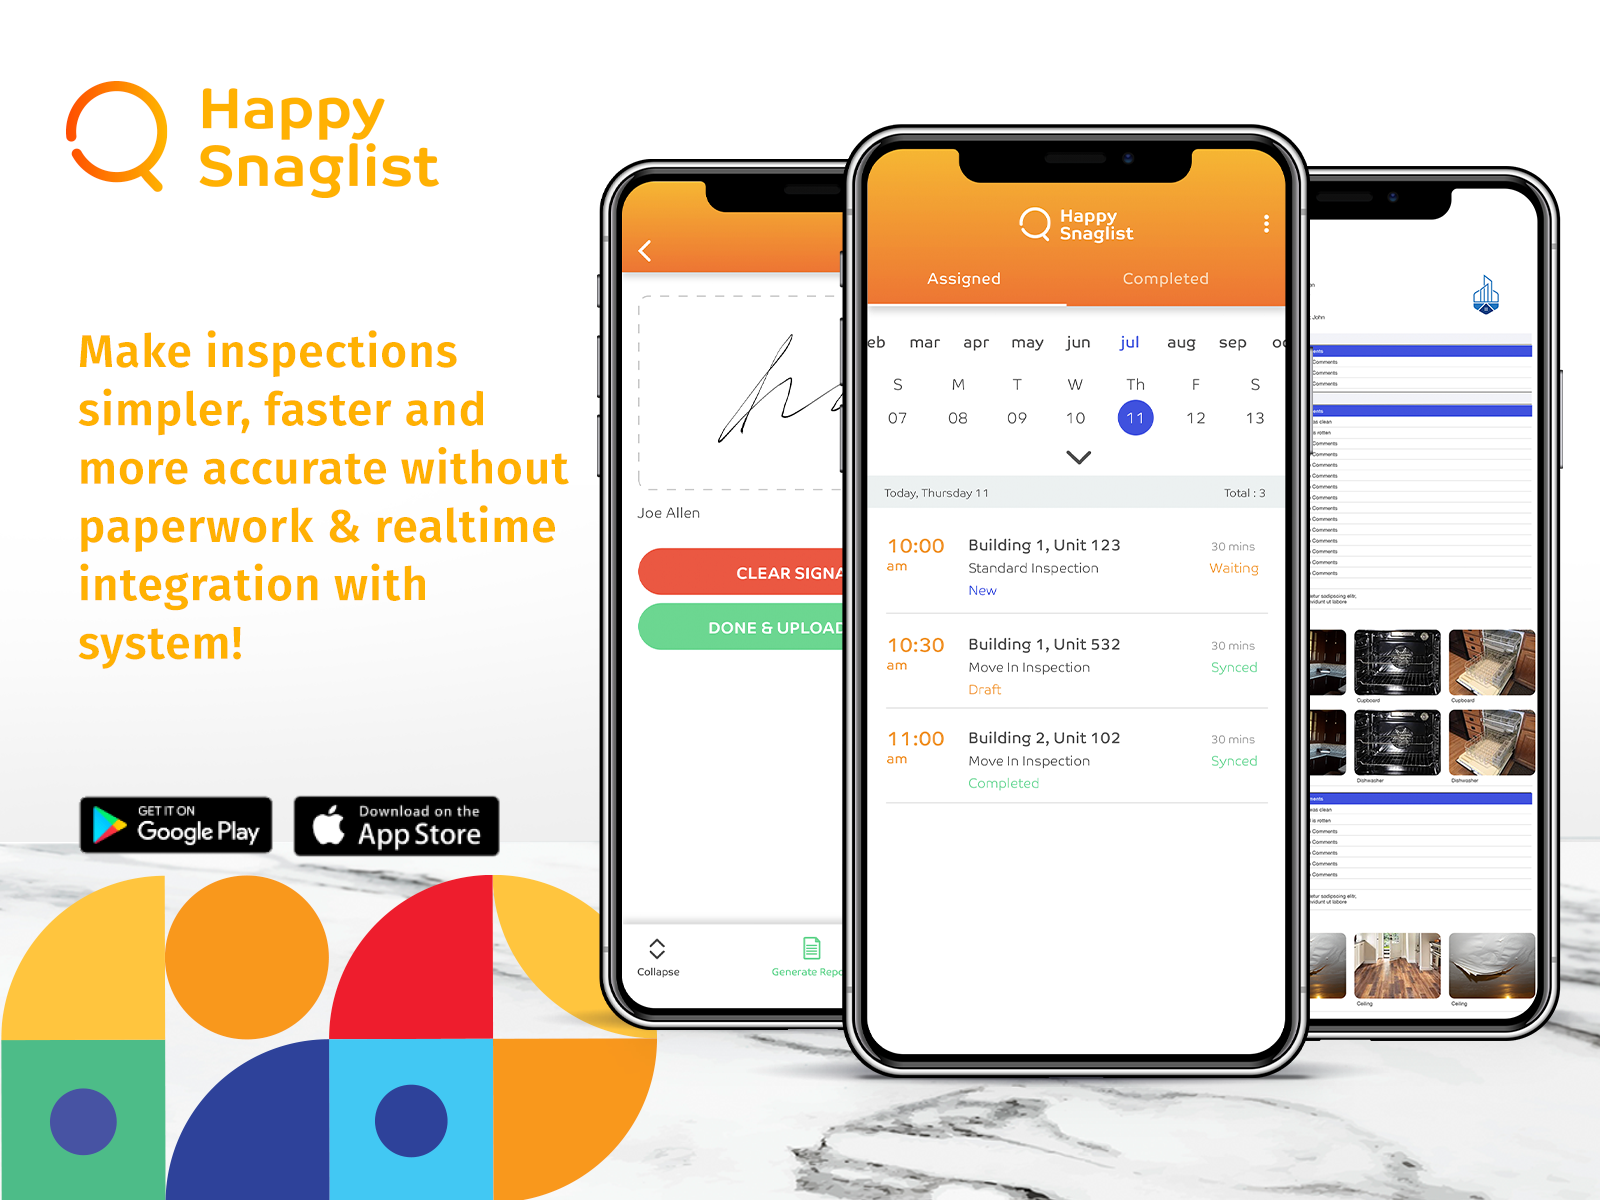 HappySnaglist - mobile app for inspections that allows your inspections team to work in a paperless environment with end-to-end, and complete integration with the core system for realtime and transparent reporting.